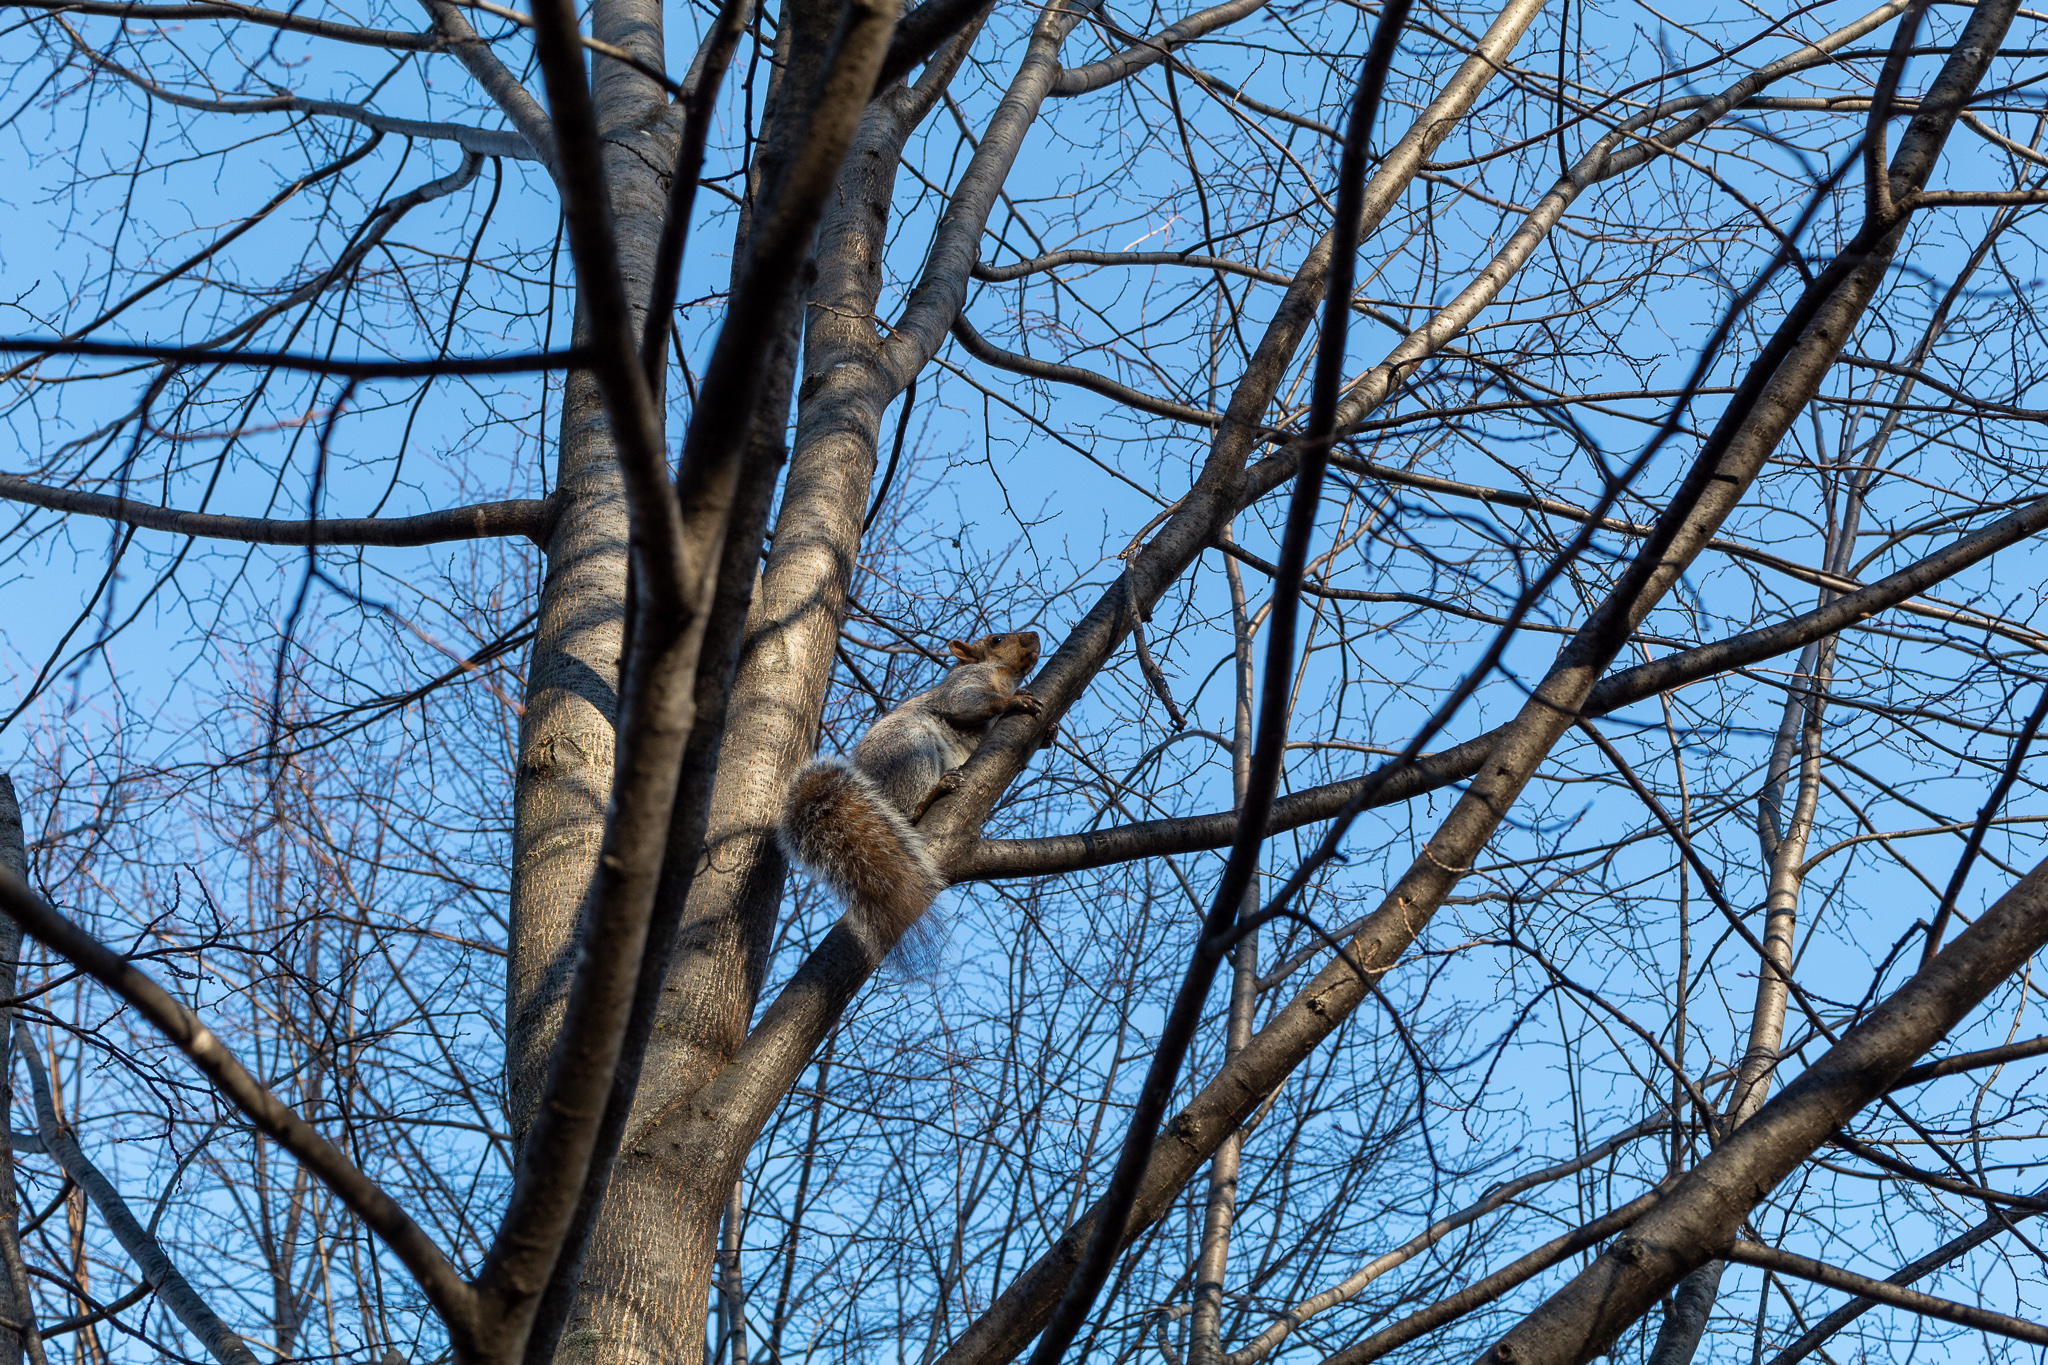 Squirrel climbing a tree which has lost its leaves